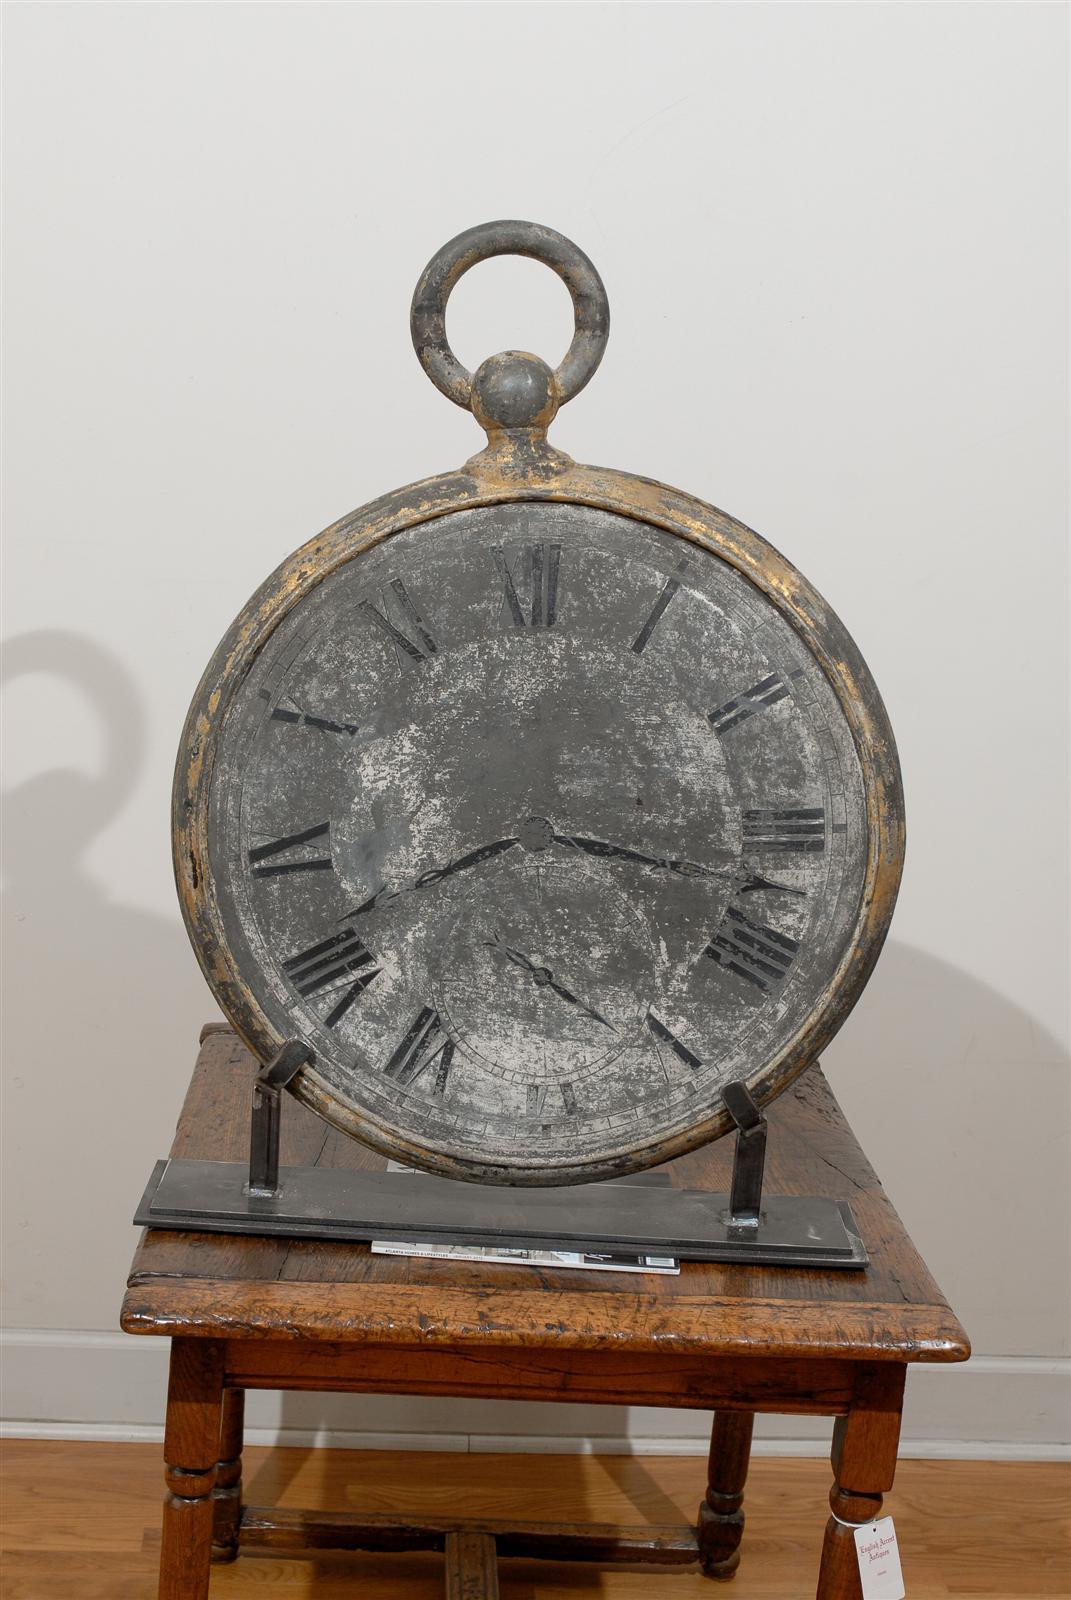 This French large size clock trade sign from the mid-19th century depicts an oversized pocket watch with round bow at the top. Made of zinc, this grey colored clock face is decorated with Roman numerals with the hands marking 8:17, possibly a date